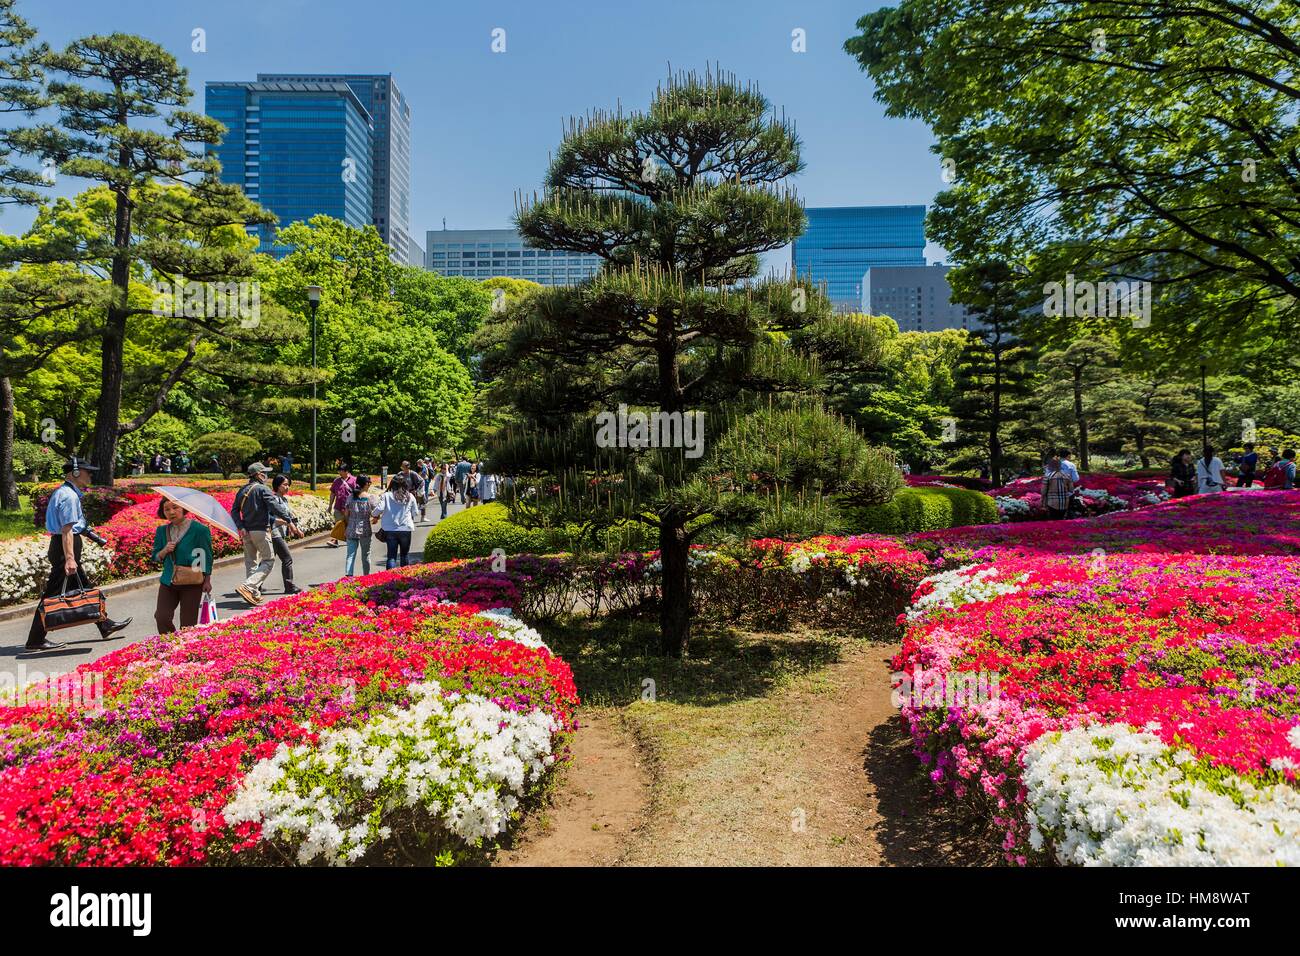 Japan Tokyo Marunouchi Imperial Palace Area Flowering In The